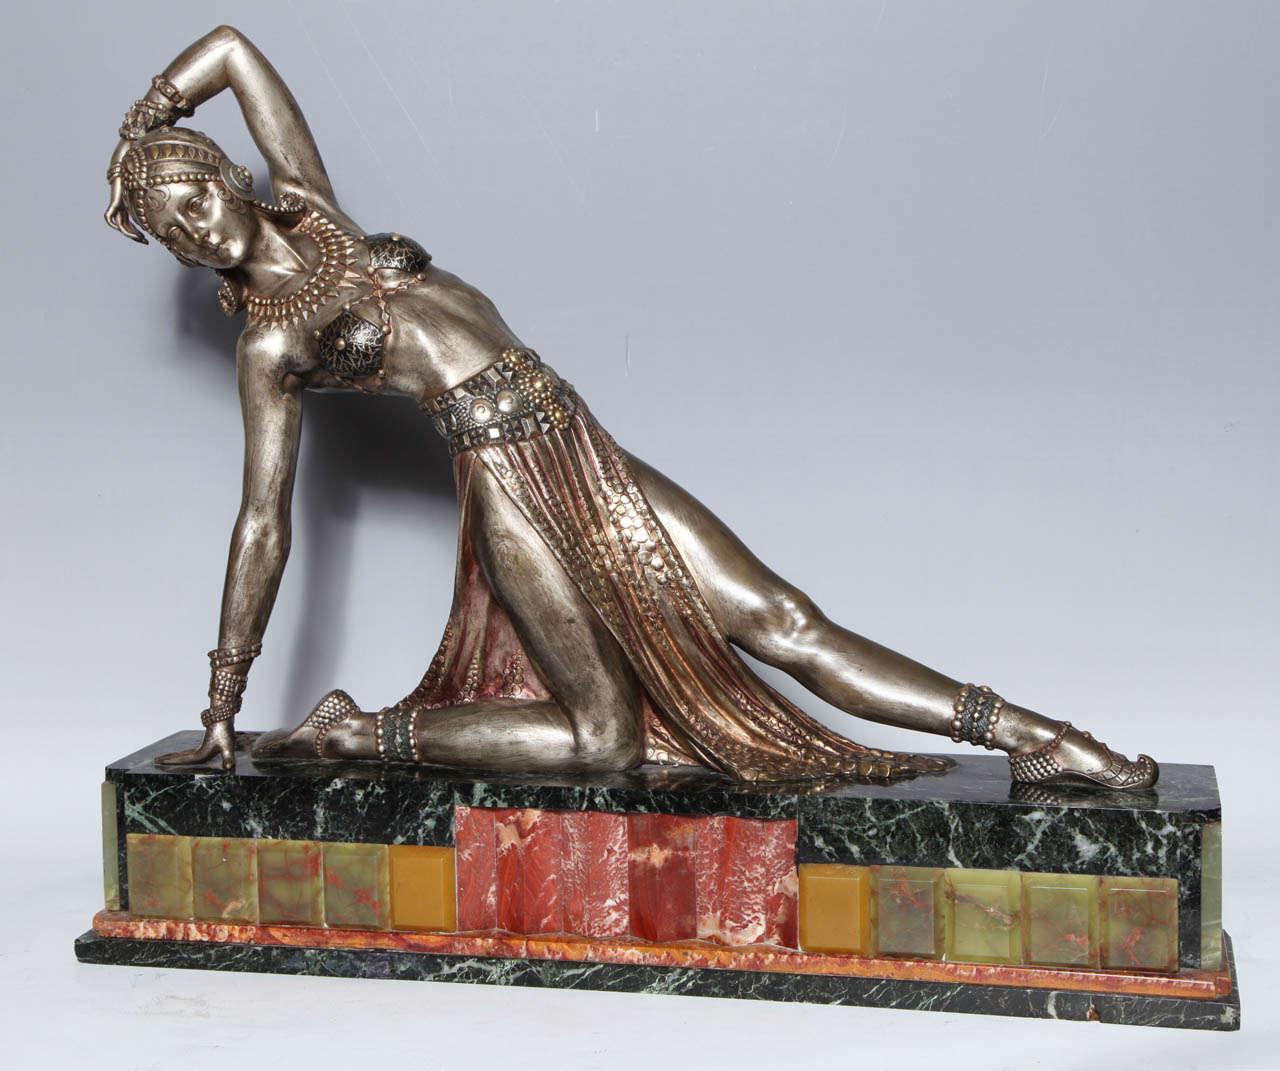 A Classic example of Demetre Chiparus Art Deco Sculpture circa 1925. Chirpuras (1886-1947) was the most sought after Decorative Sculpture in the Early 1900s. Known for his combinations of Silver and Gilt, he focused on Dancers and their slender